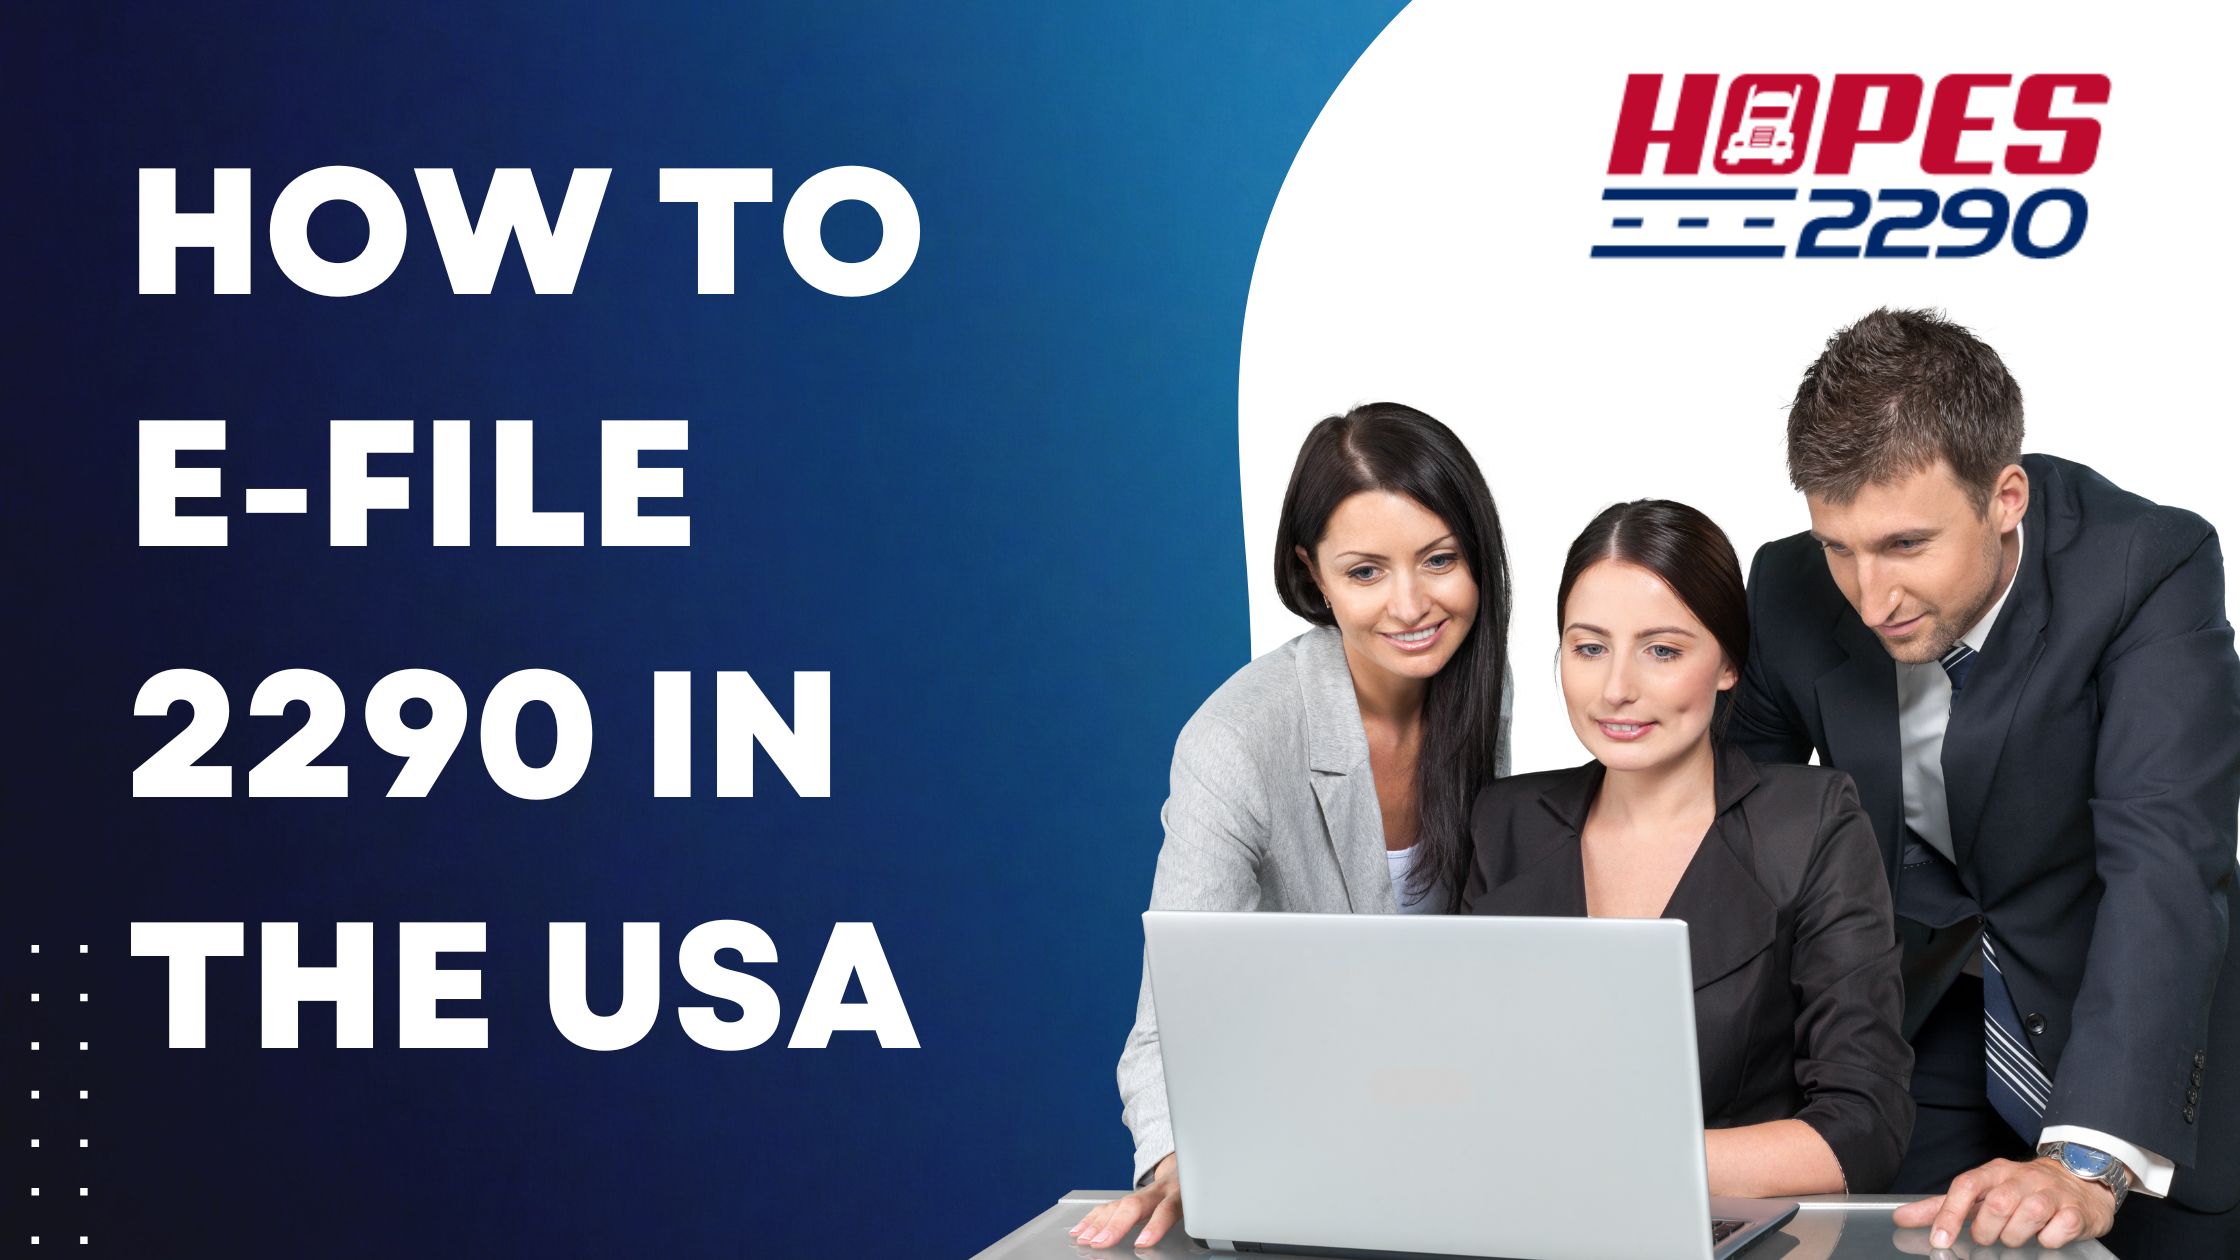 HOW TO E-FILE 2290 IN THE USA